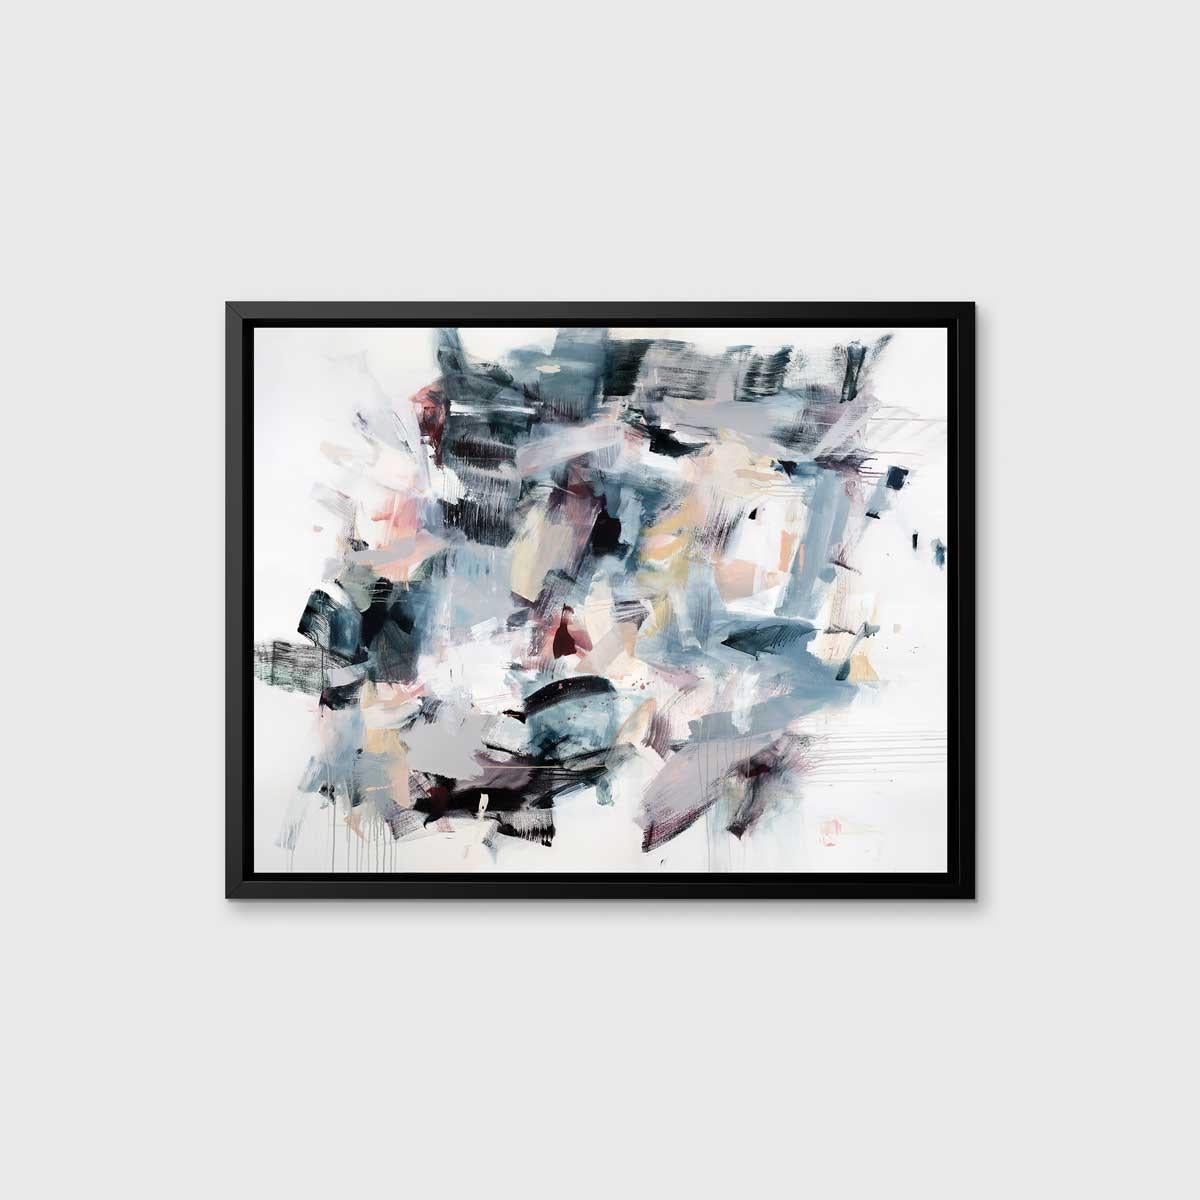 This limited edition abstract giclee print by Kelly Rossetti features layers of light, loose strokes  of pale creme and pink over top of a range of blues, with pops of a unique green color accenting the lower portion of the composition. The result